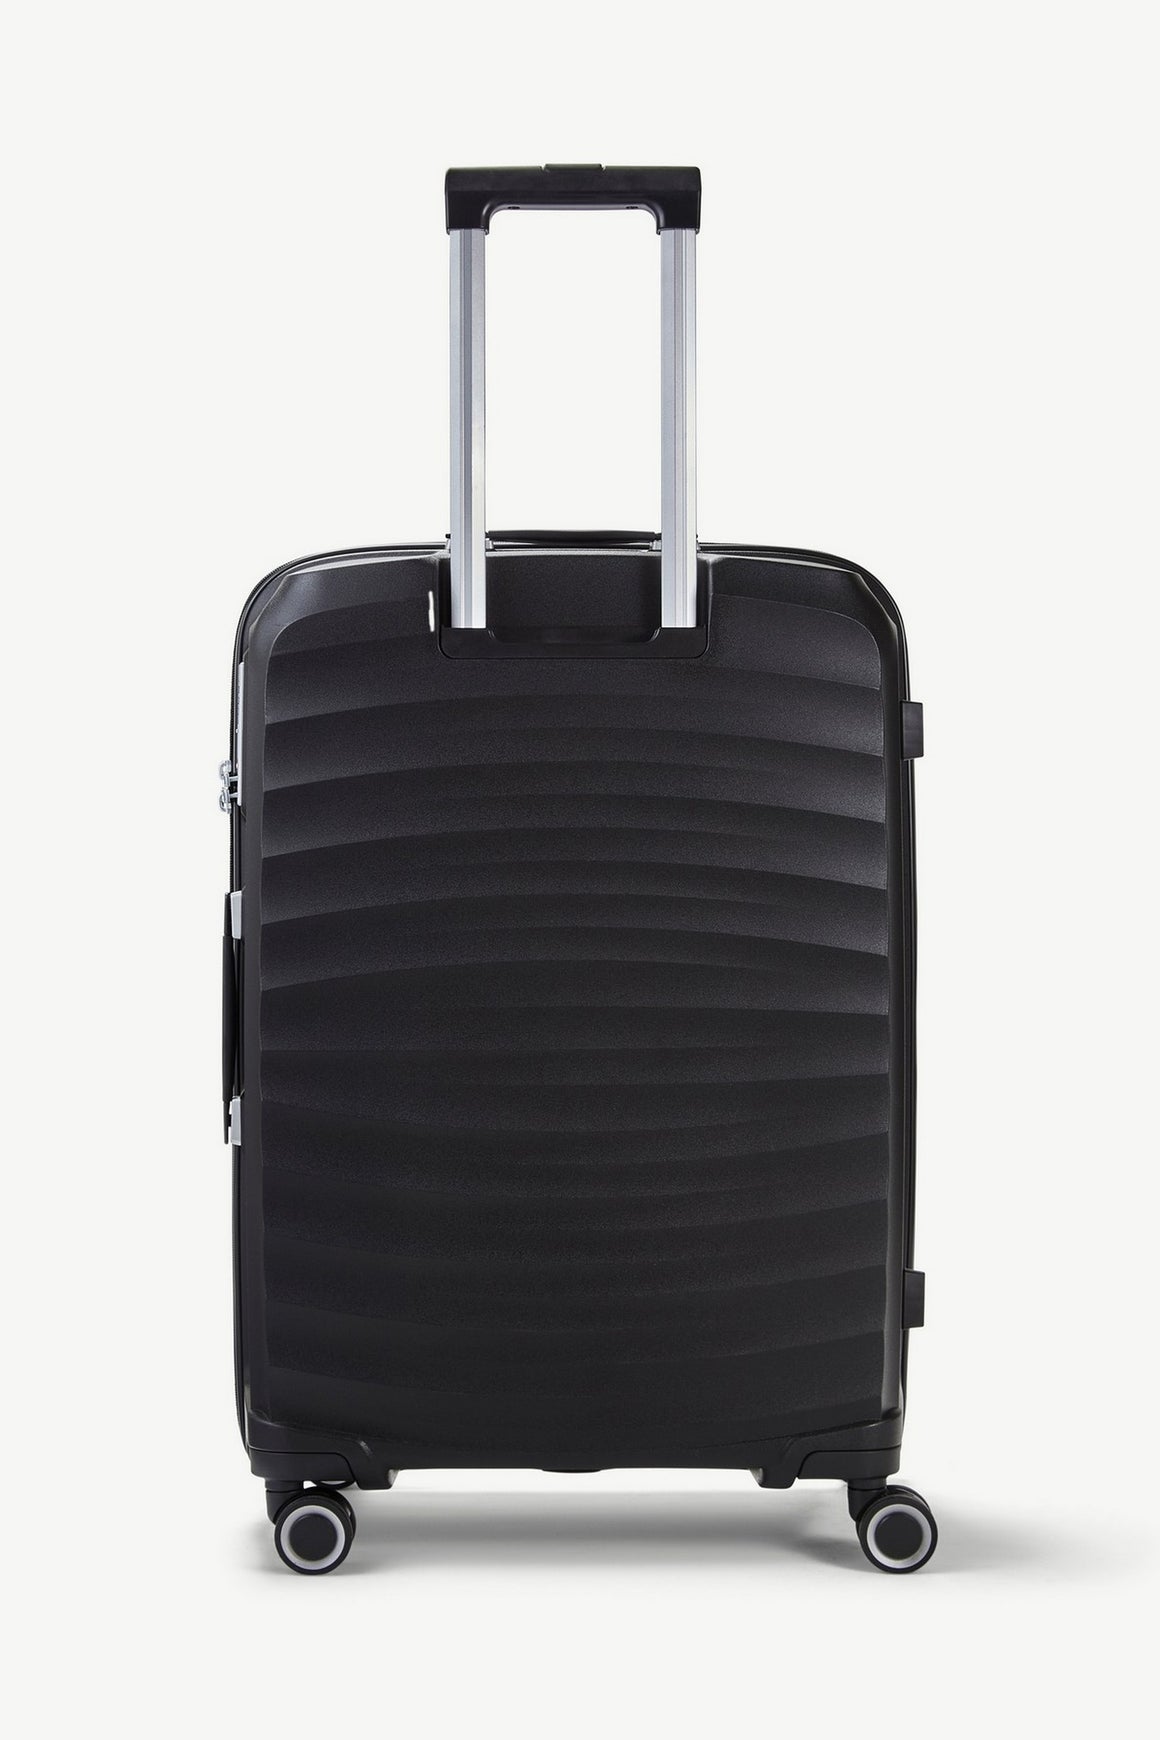 Sunwave Set of 3 Suitcases